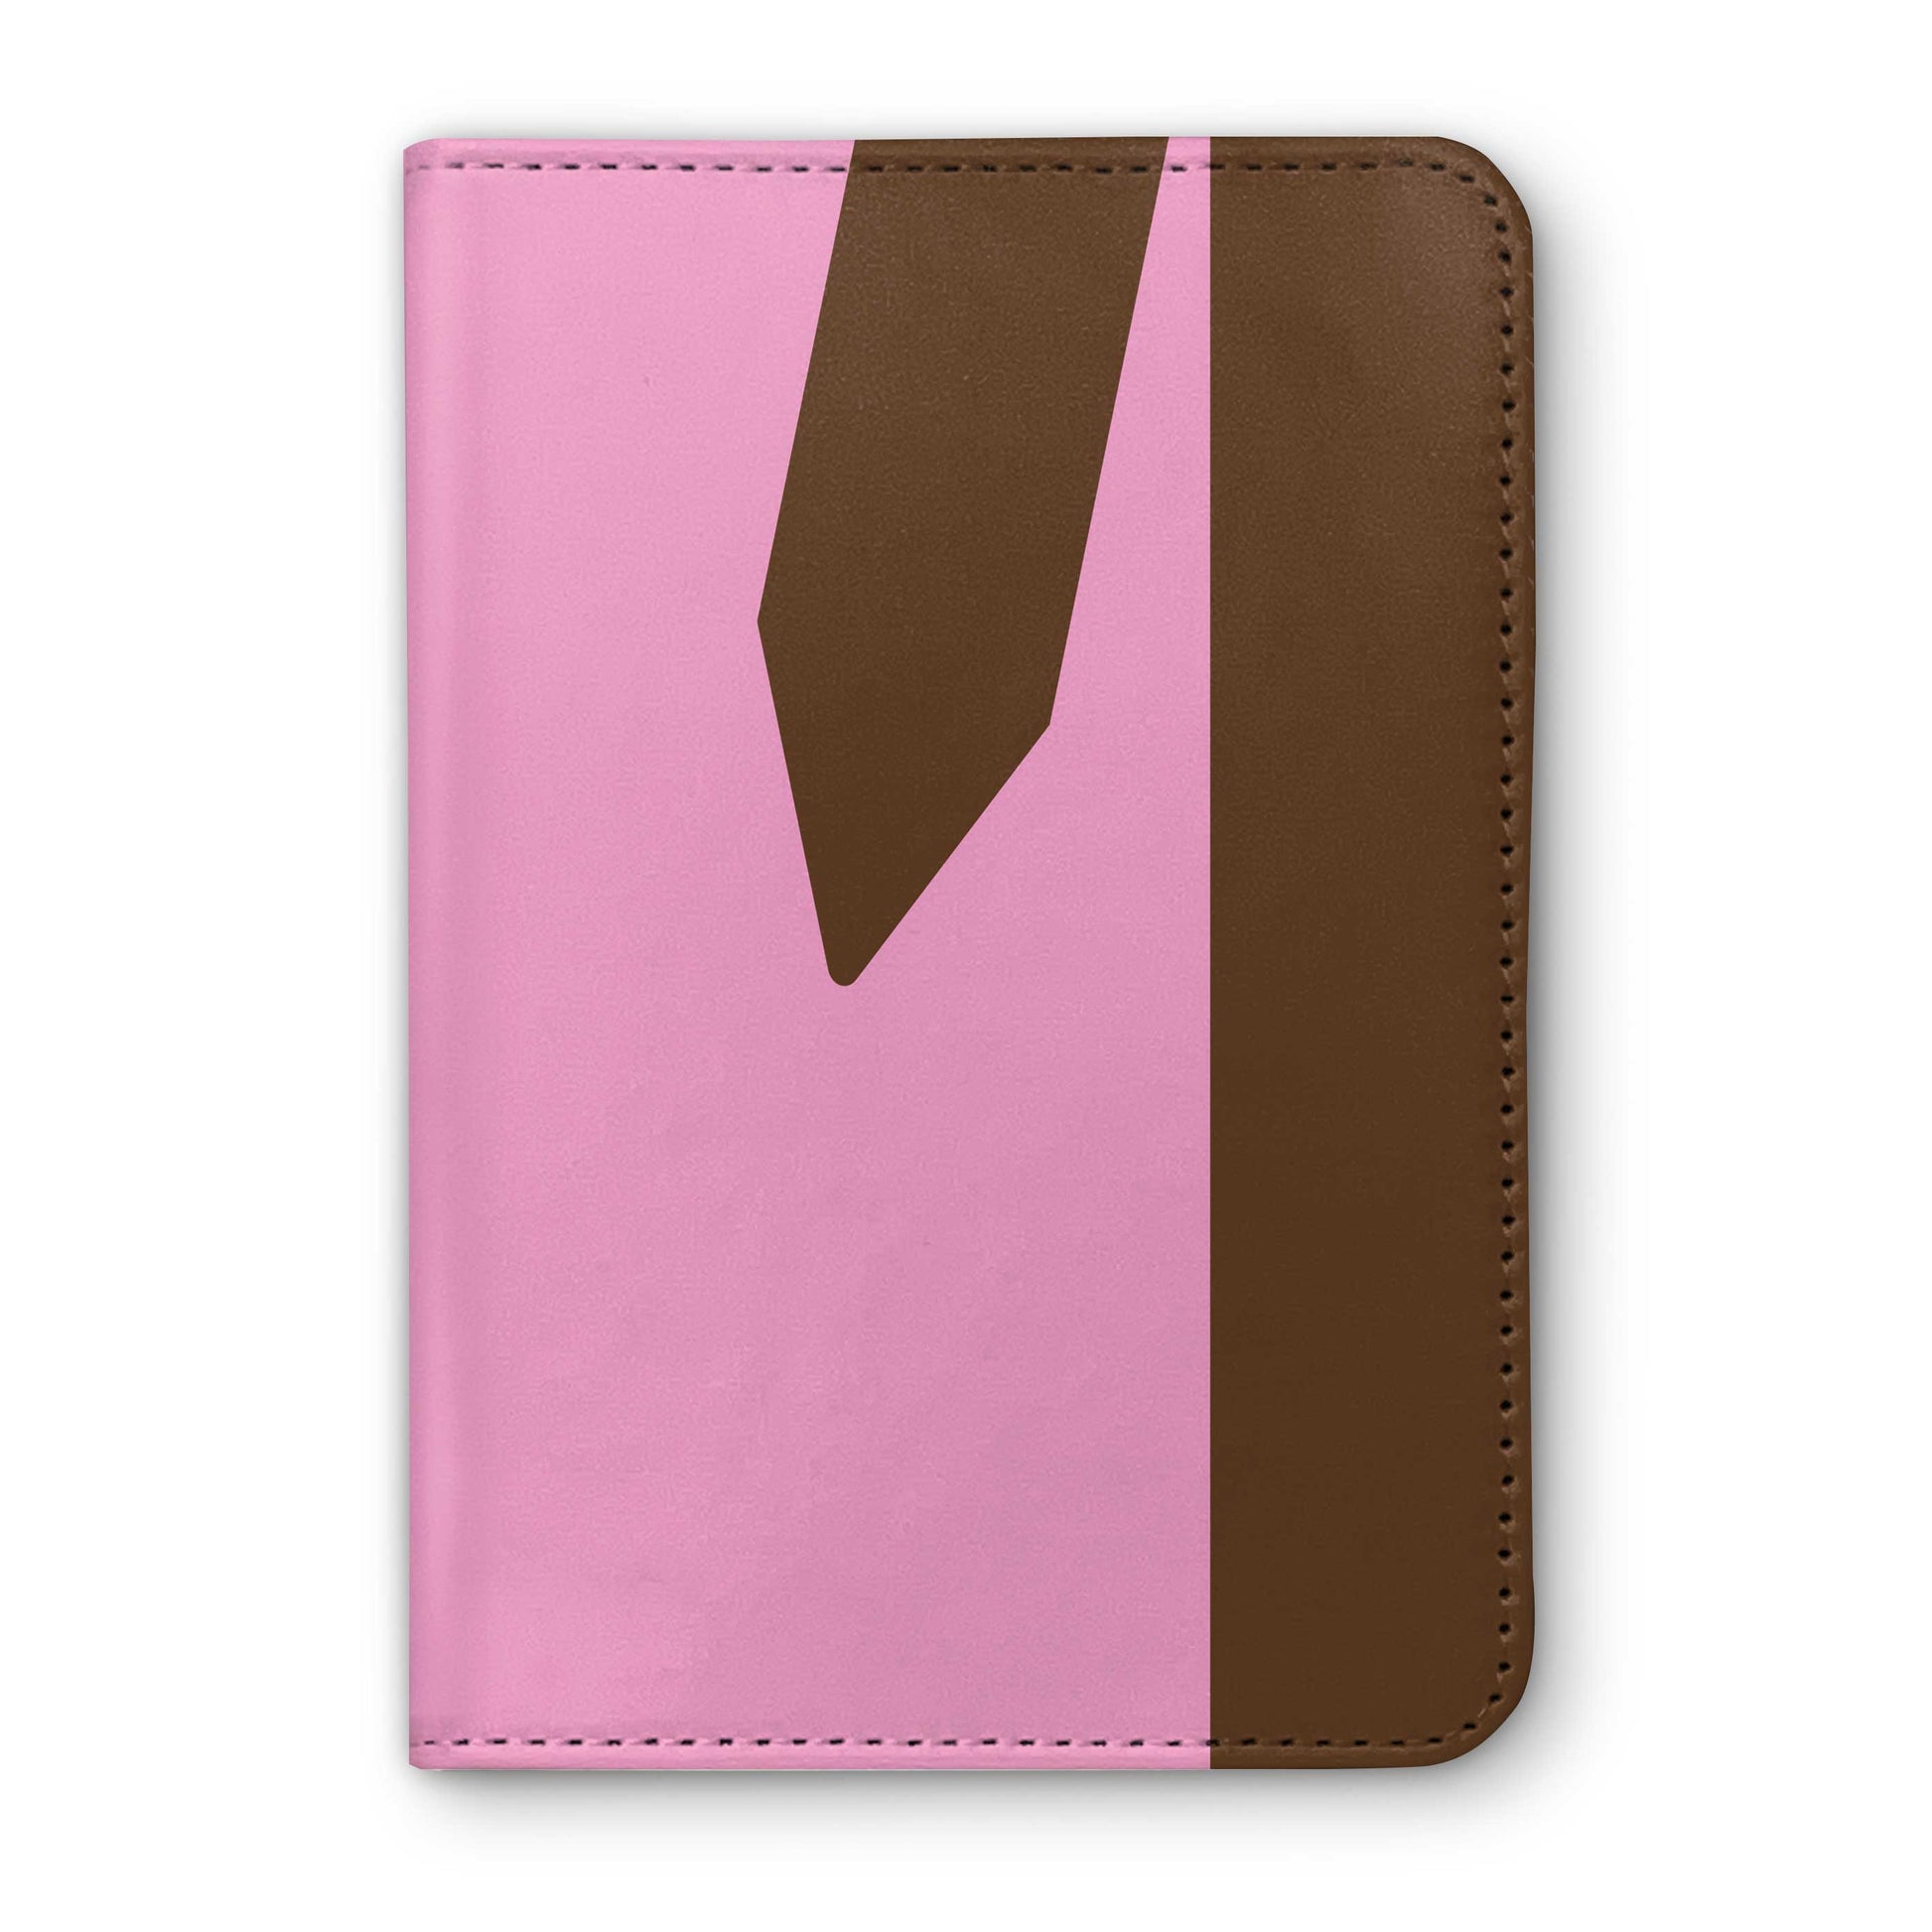 Mrs Suzanne Lawrence Horse Racing Passport Holder - Hacked Up Horse Racing Gifts